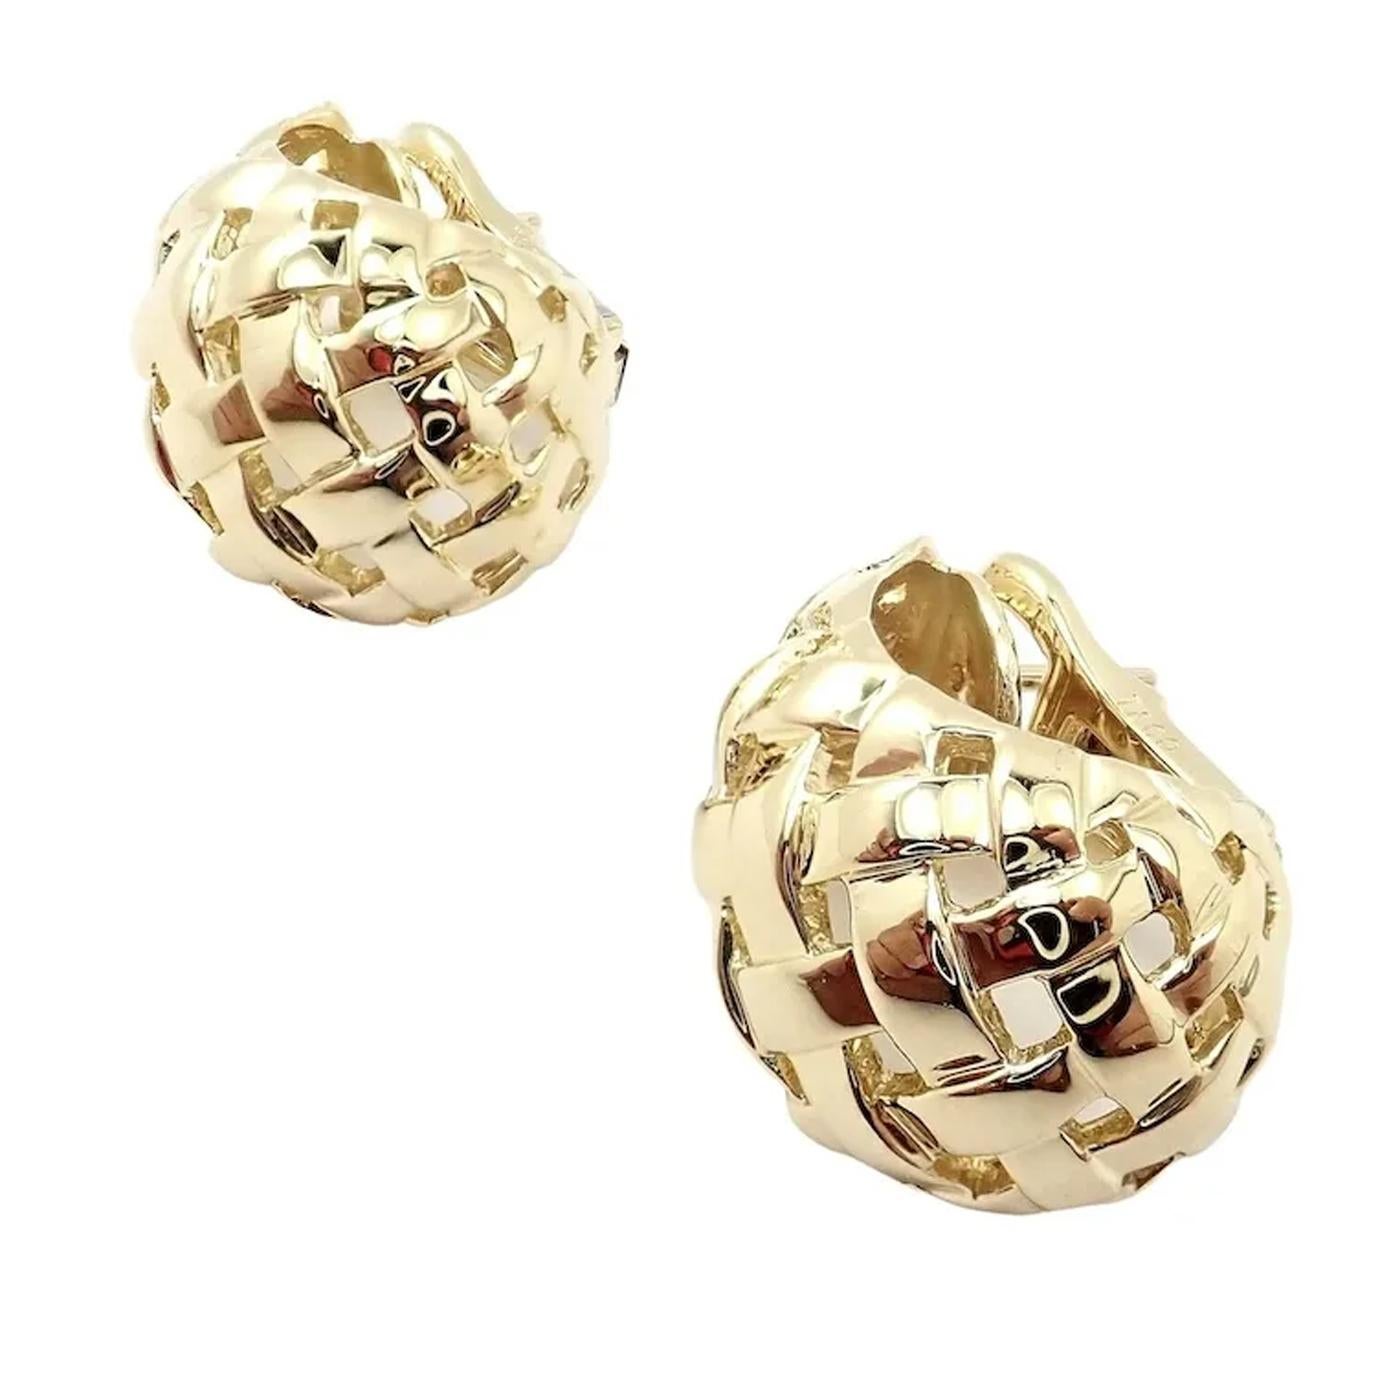 A pair of Tiffany and Company 18 karat yellow gold Vannerie basket weave clip-on hoop earrings. These earrings feature an open basketweave motif in a J hoop design with clip-on closures. This Tiffany & Co. basket weave earrings weigh approx. 17.4